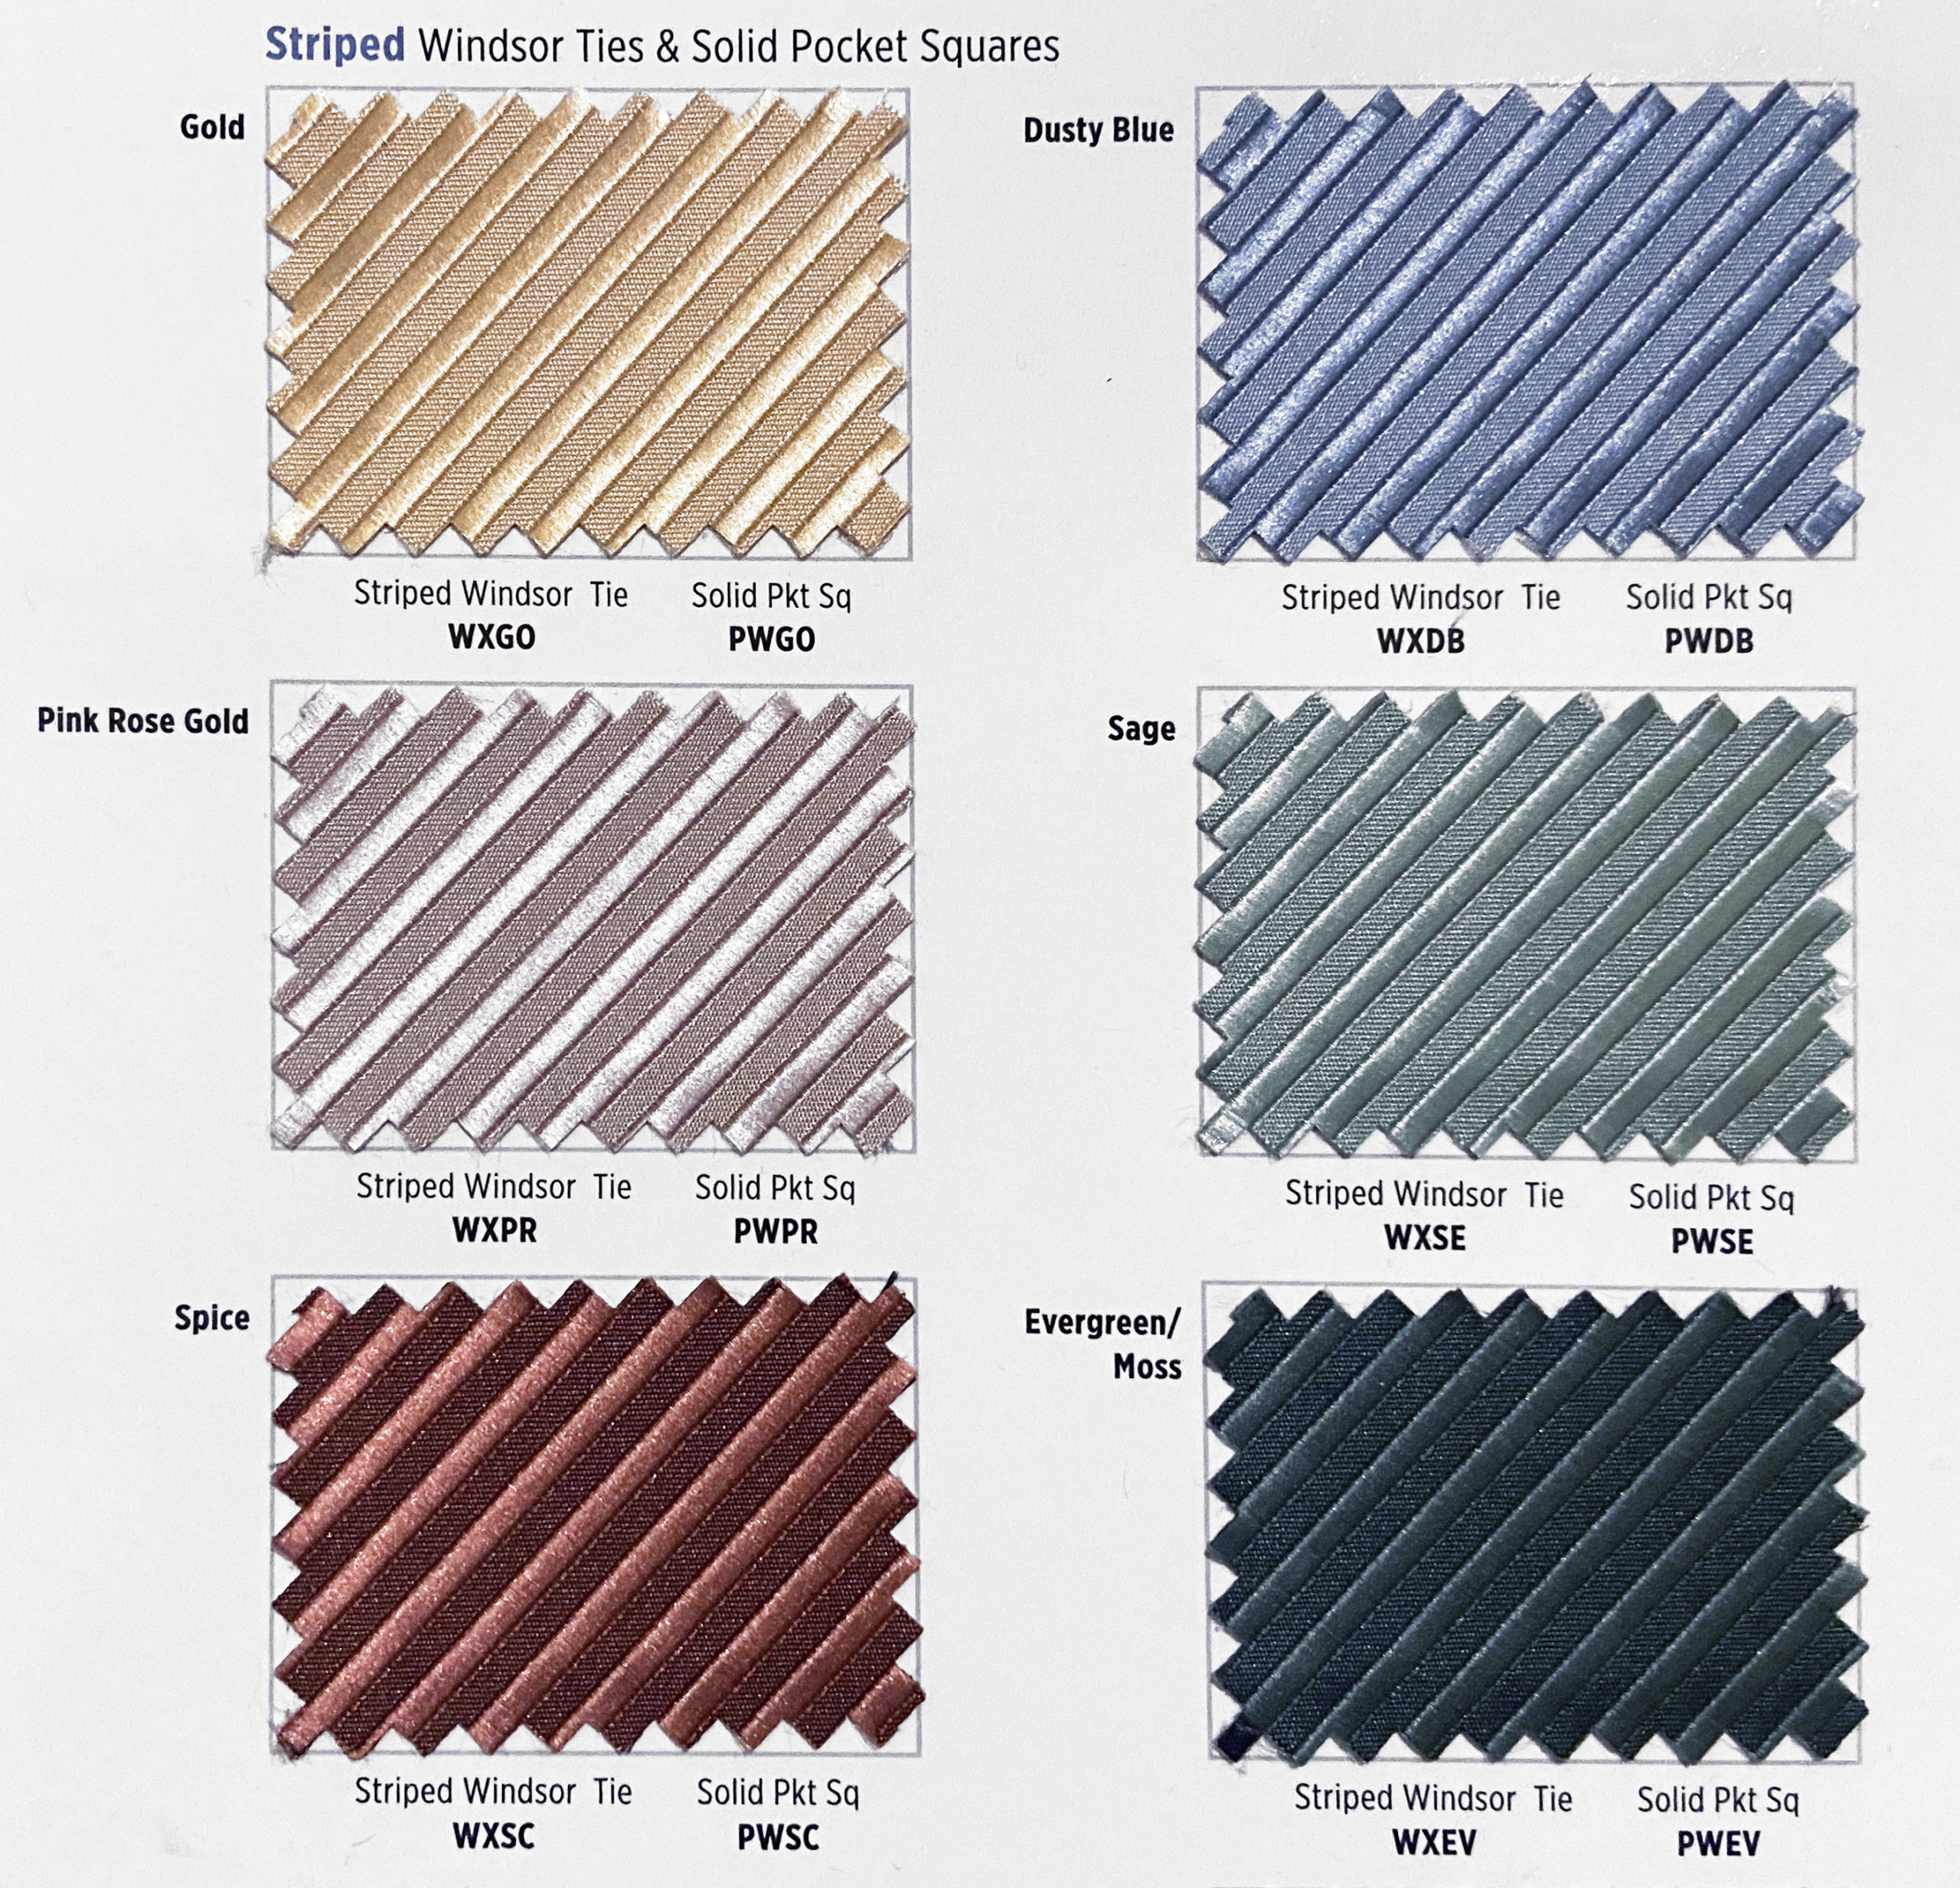 Windsor Tie Striped Swatches